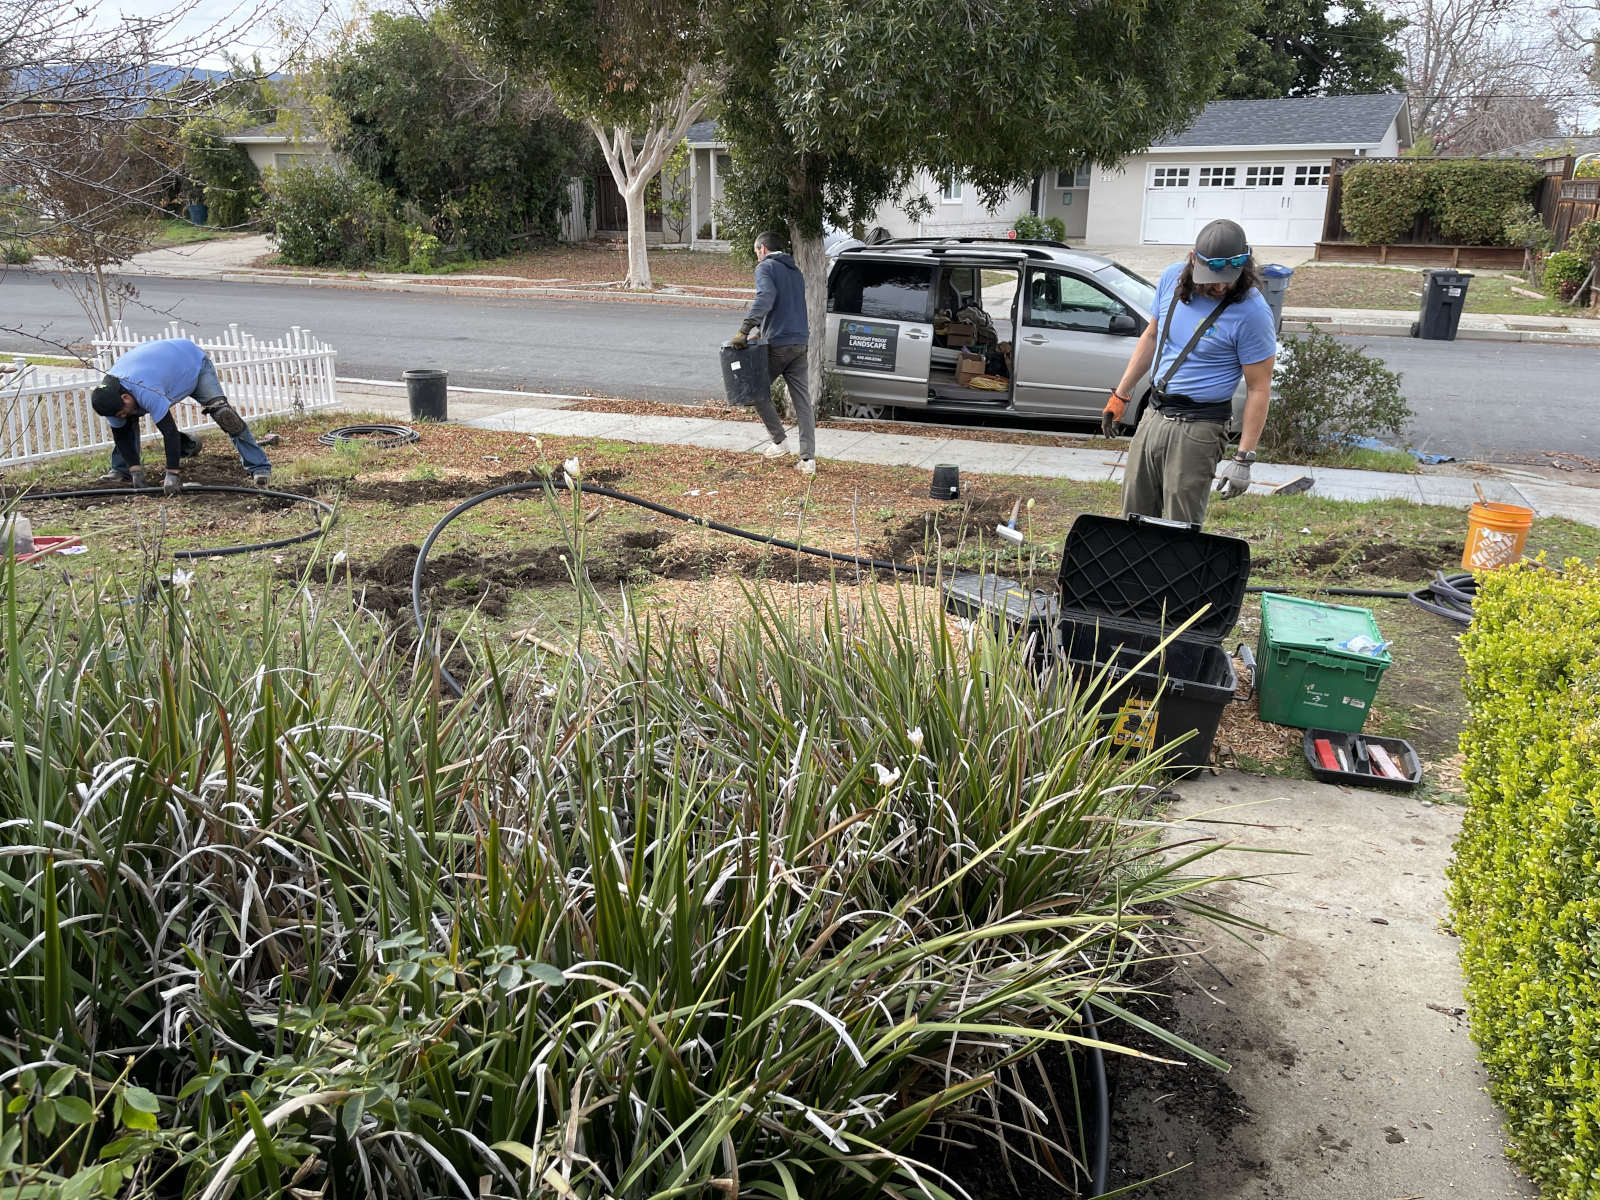 Three men wearing blue shirts are working on a greywater system in a yard